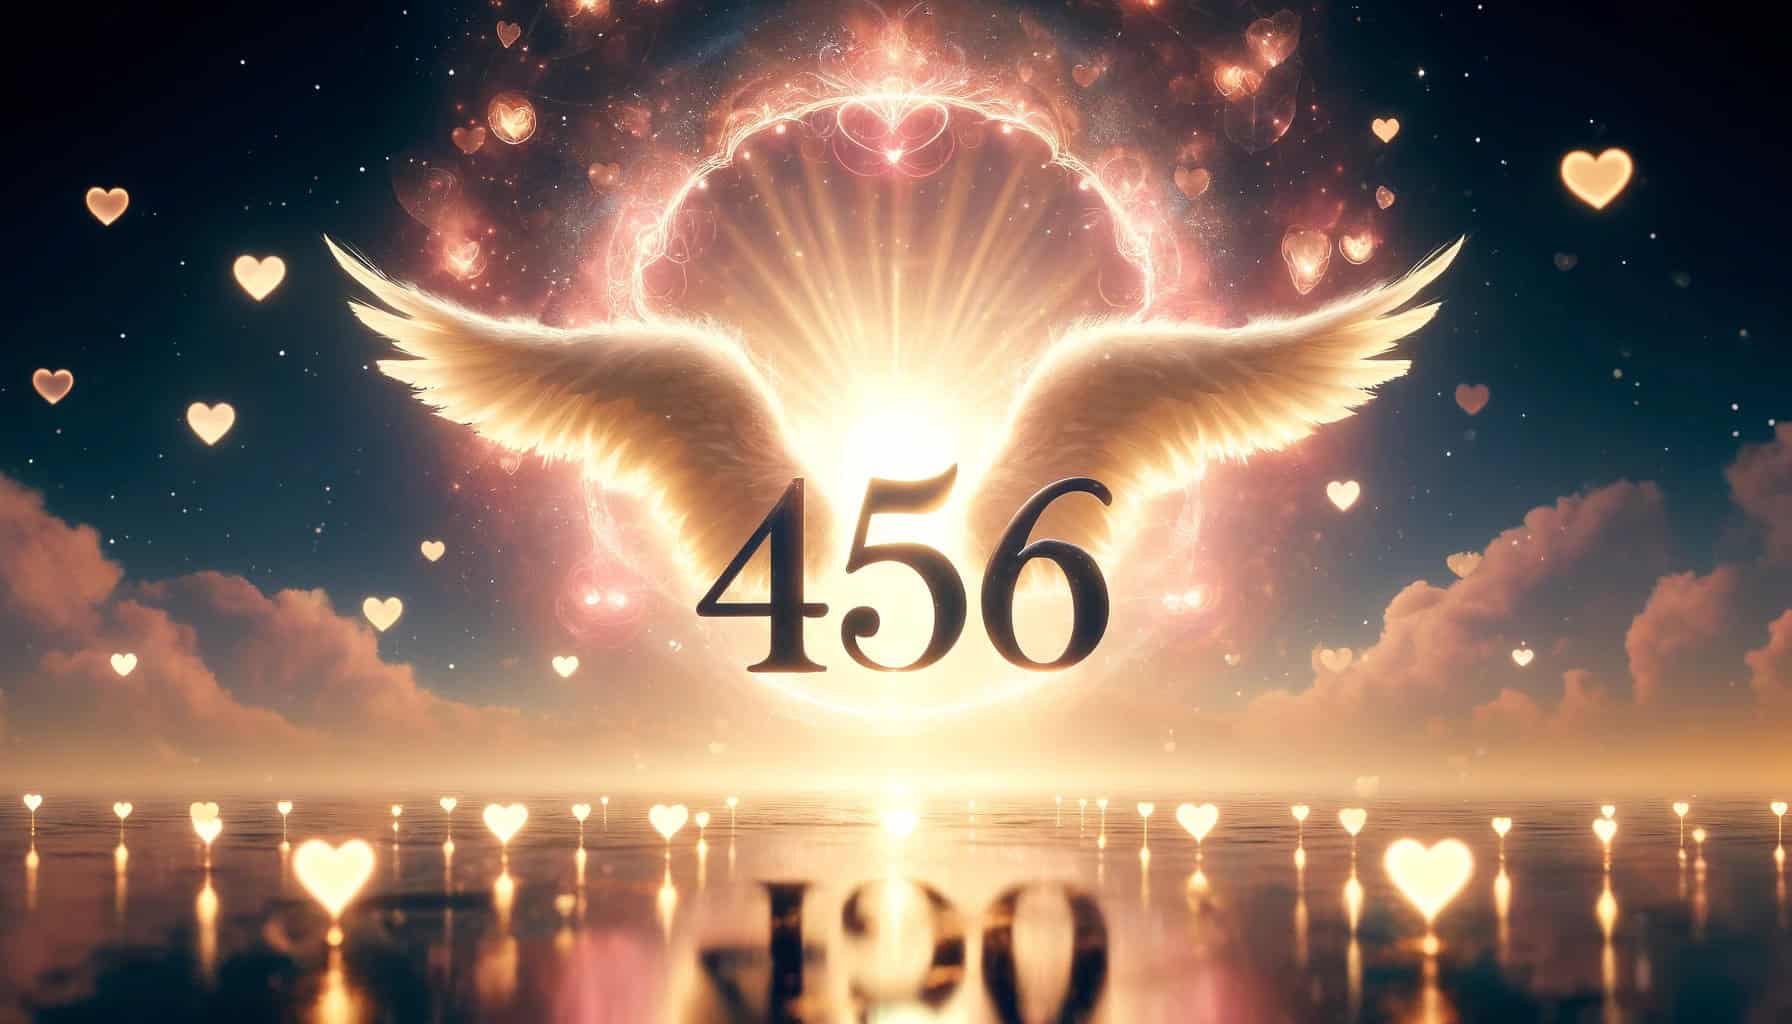 The 456 Angel Number Meaning for Love and Twin Flame